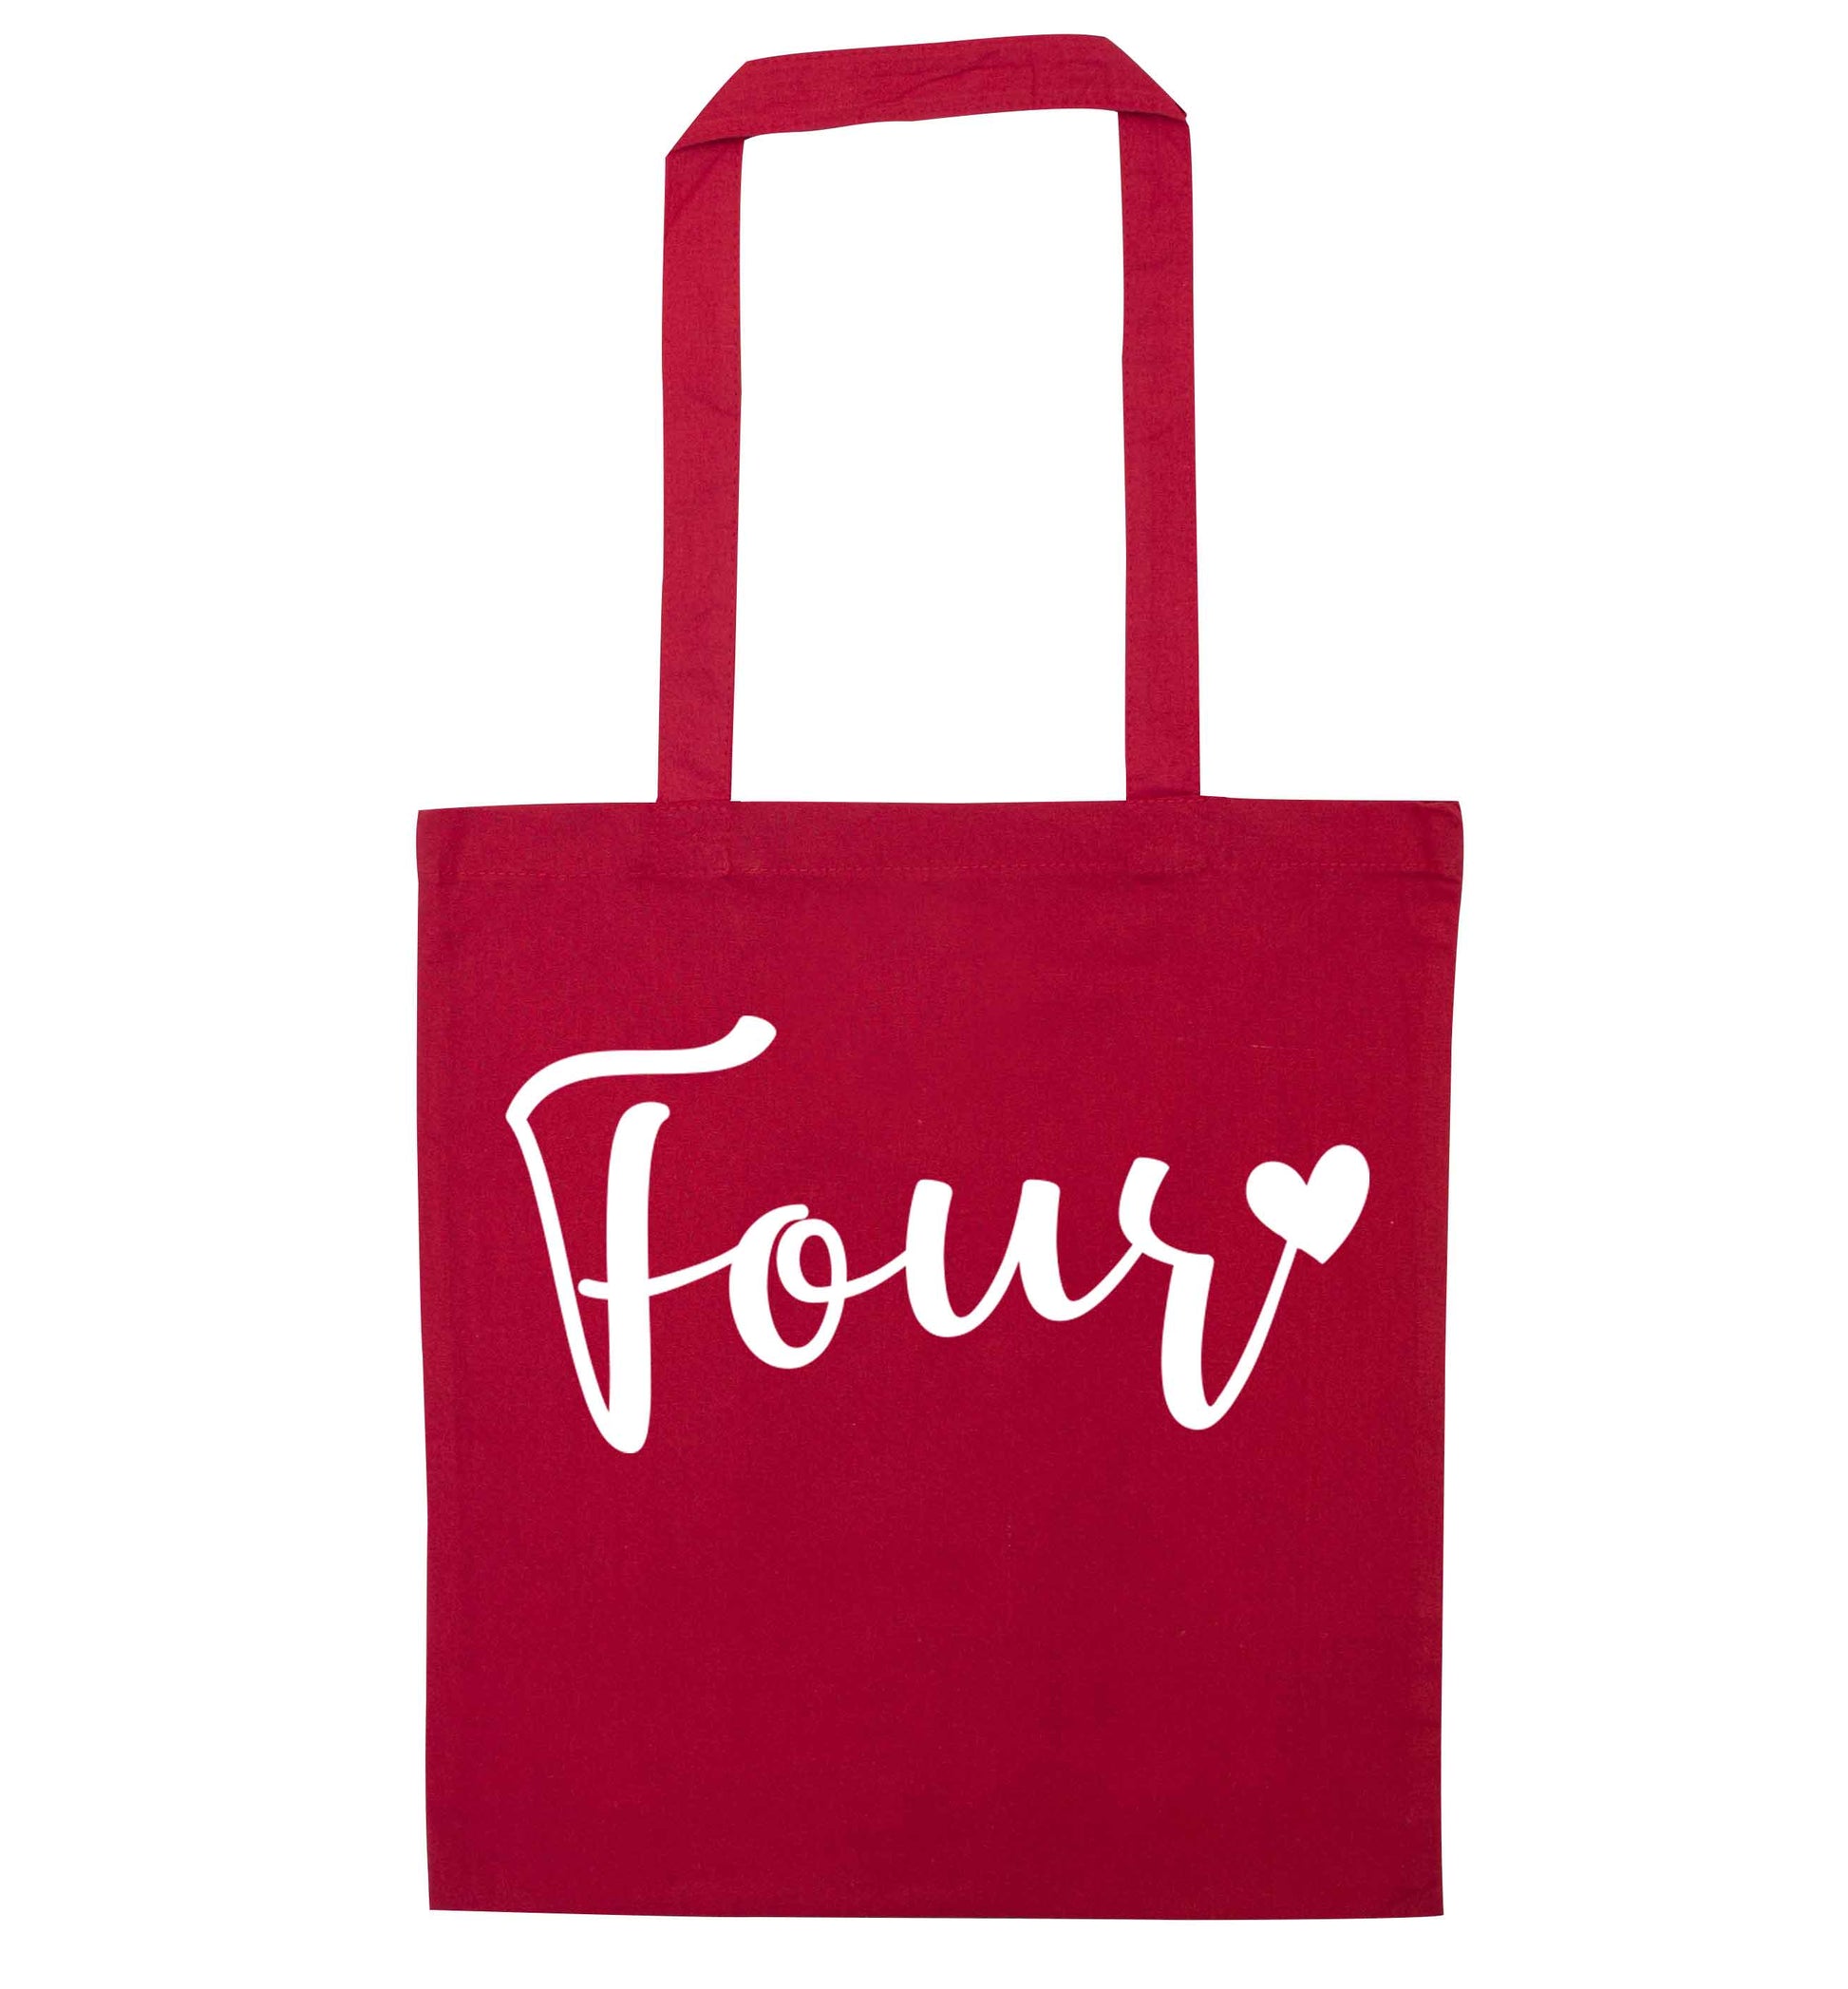 Four and heart red tote bag